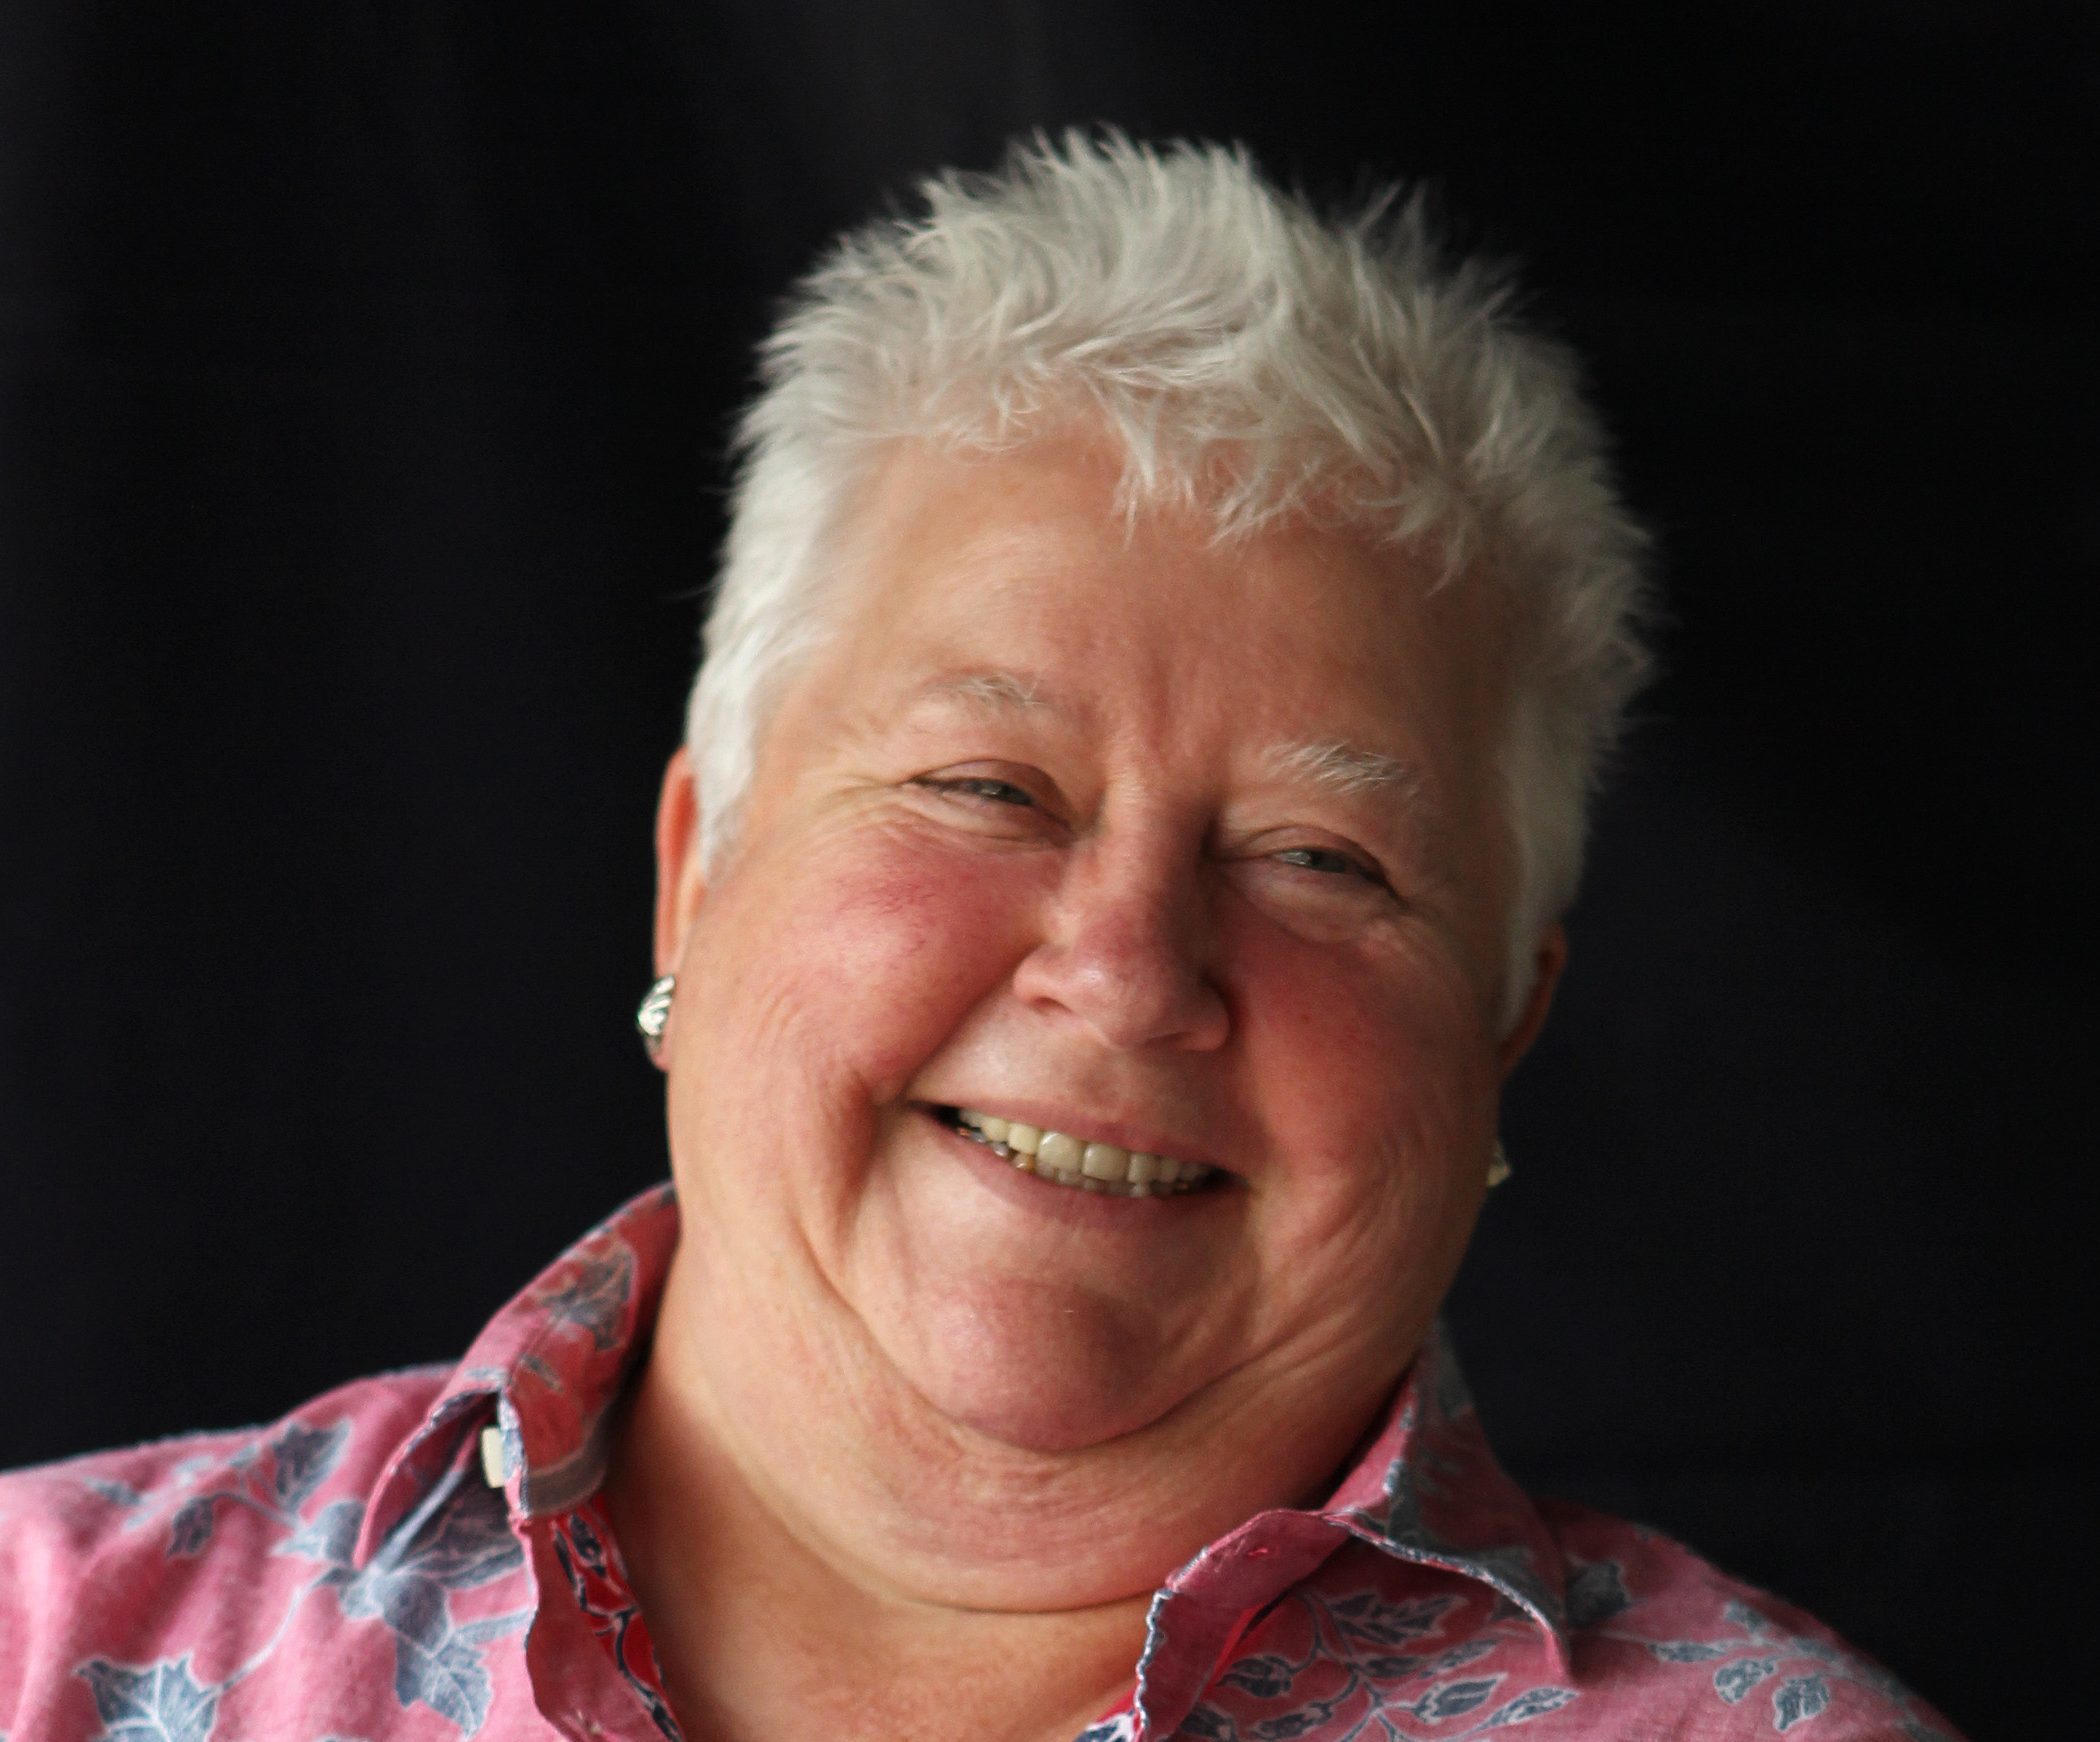 Scottish author Val McDermid will take part in the event (B Marshall, DCT Photographers)